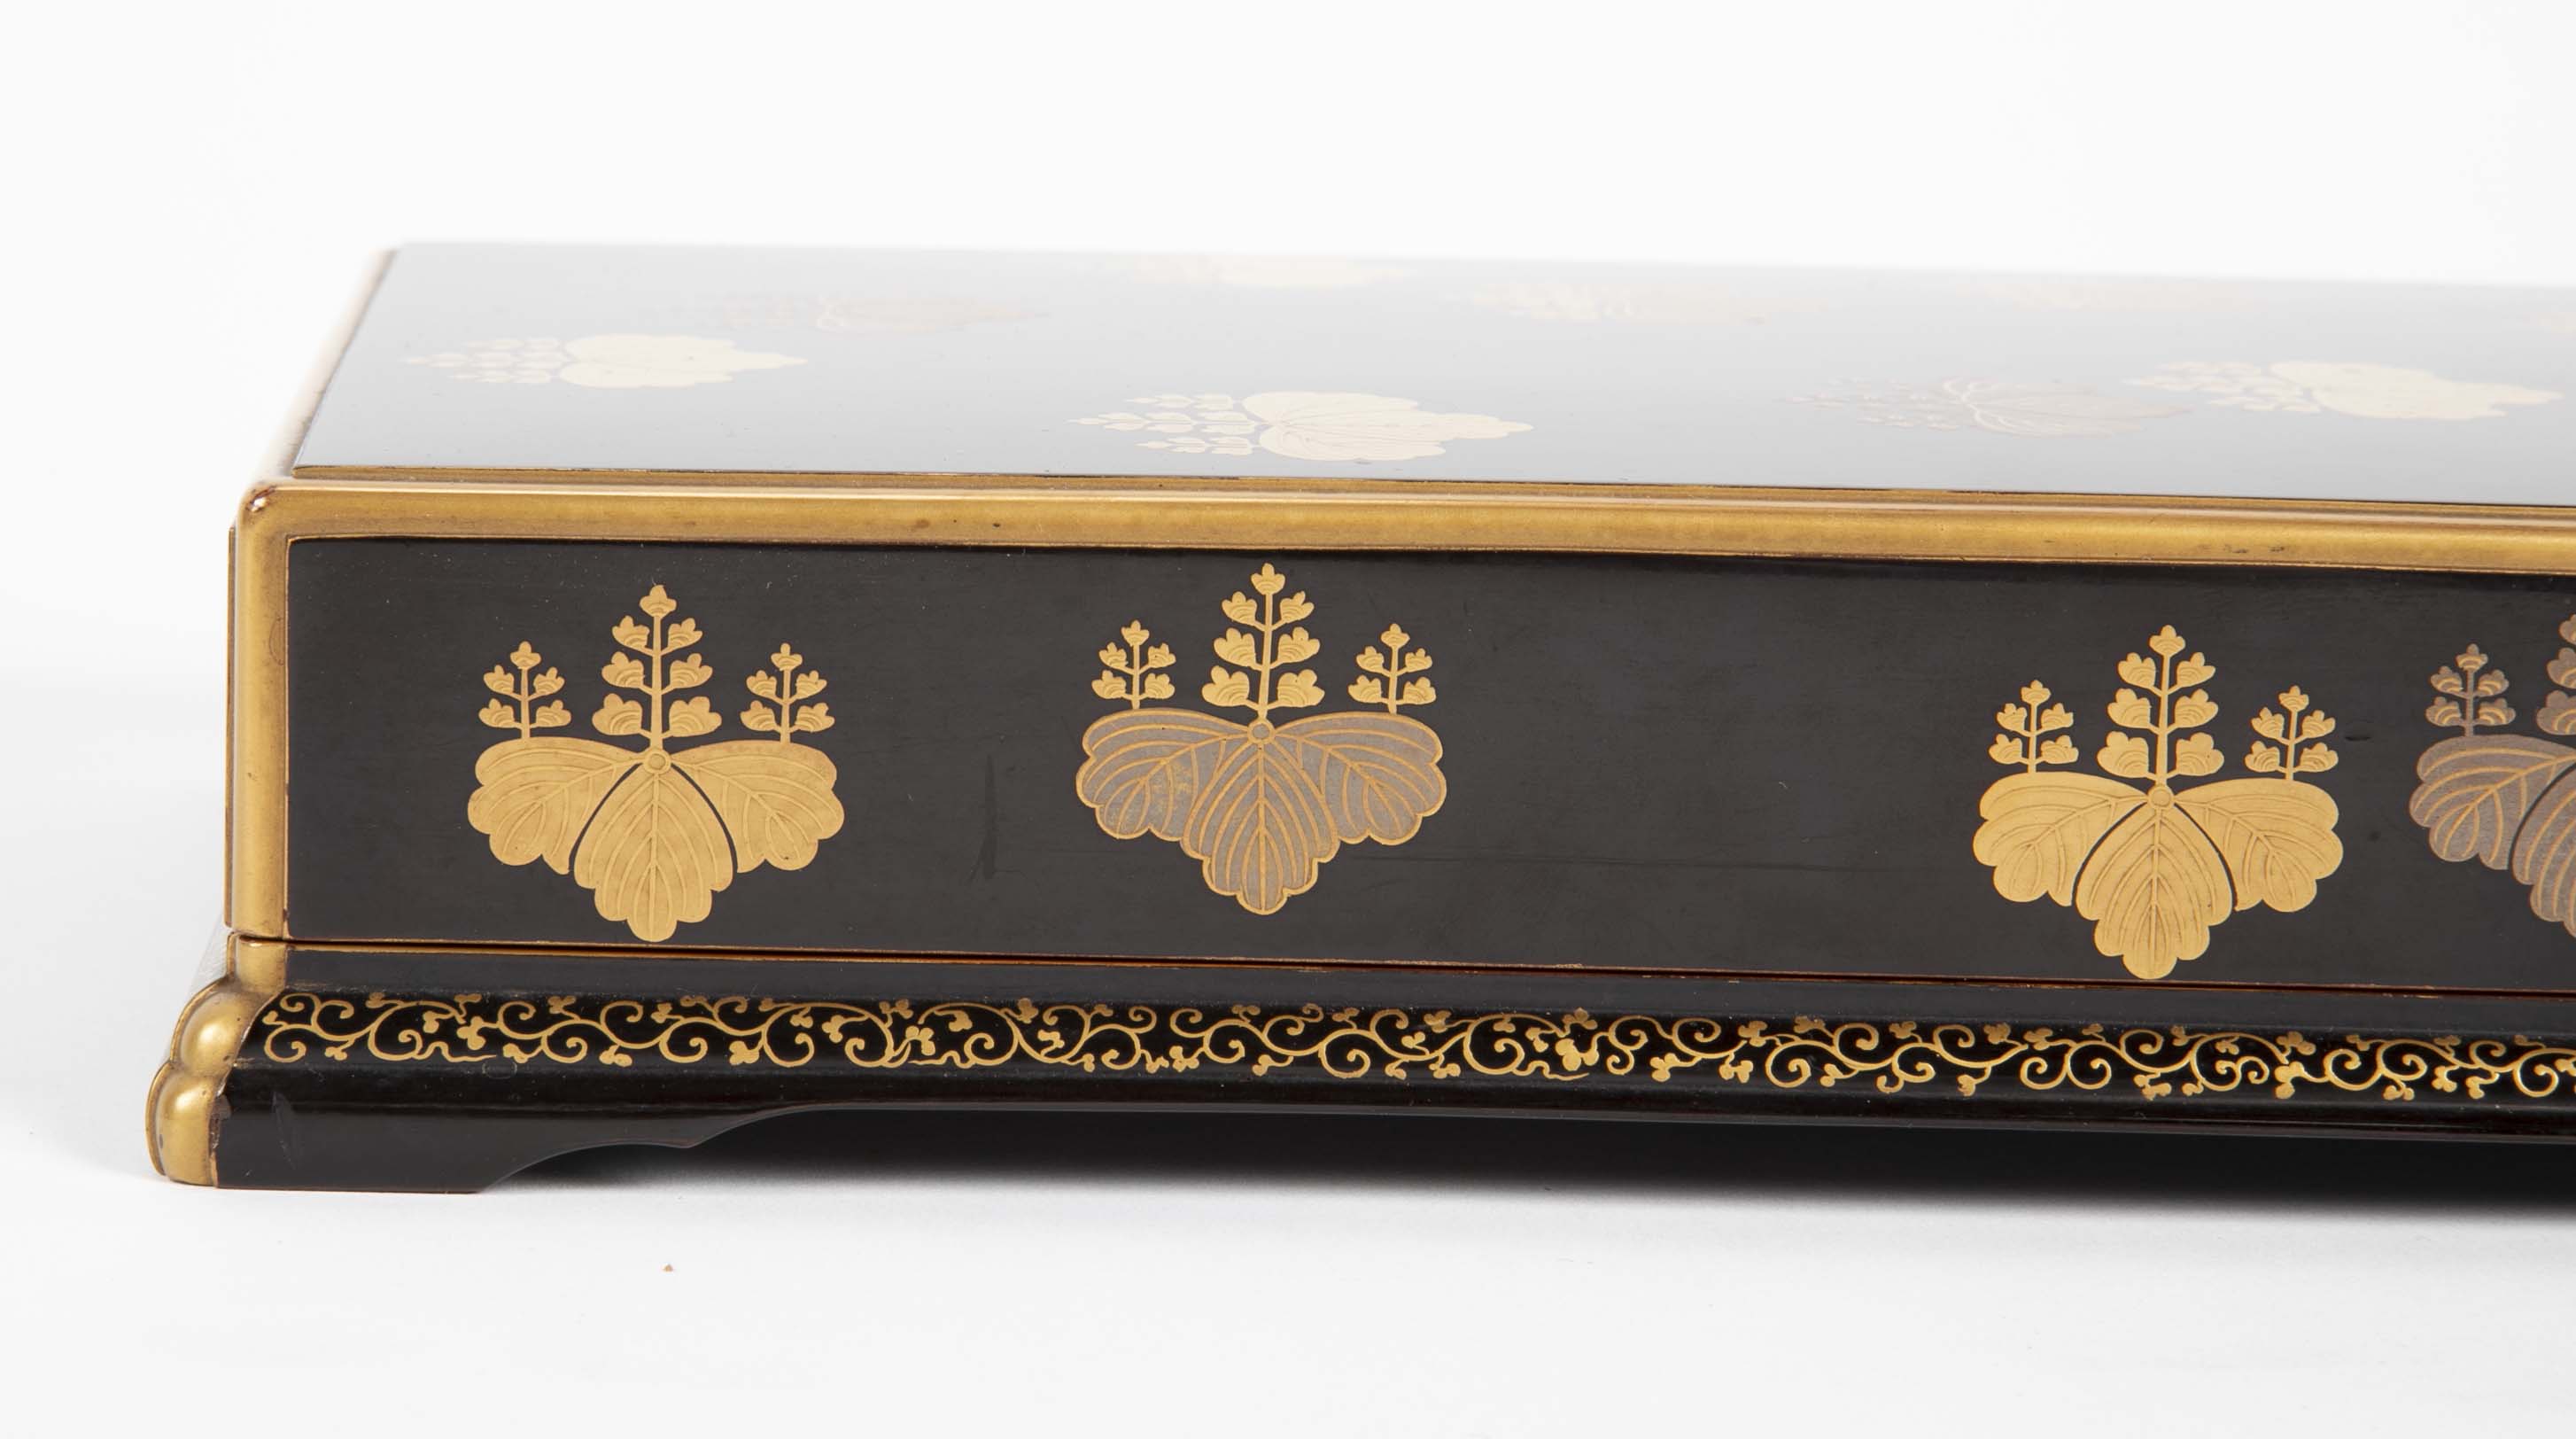 Black Lacquer Japanese Ink Stone Box in Presentation Case